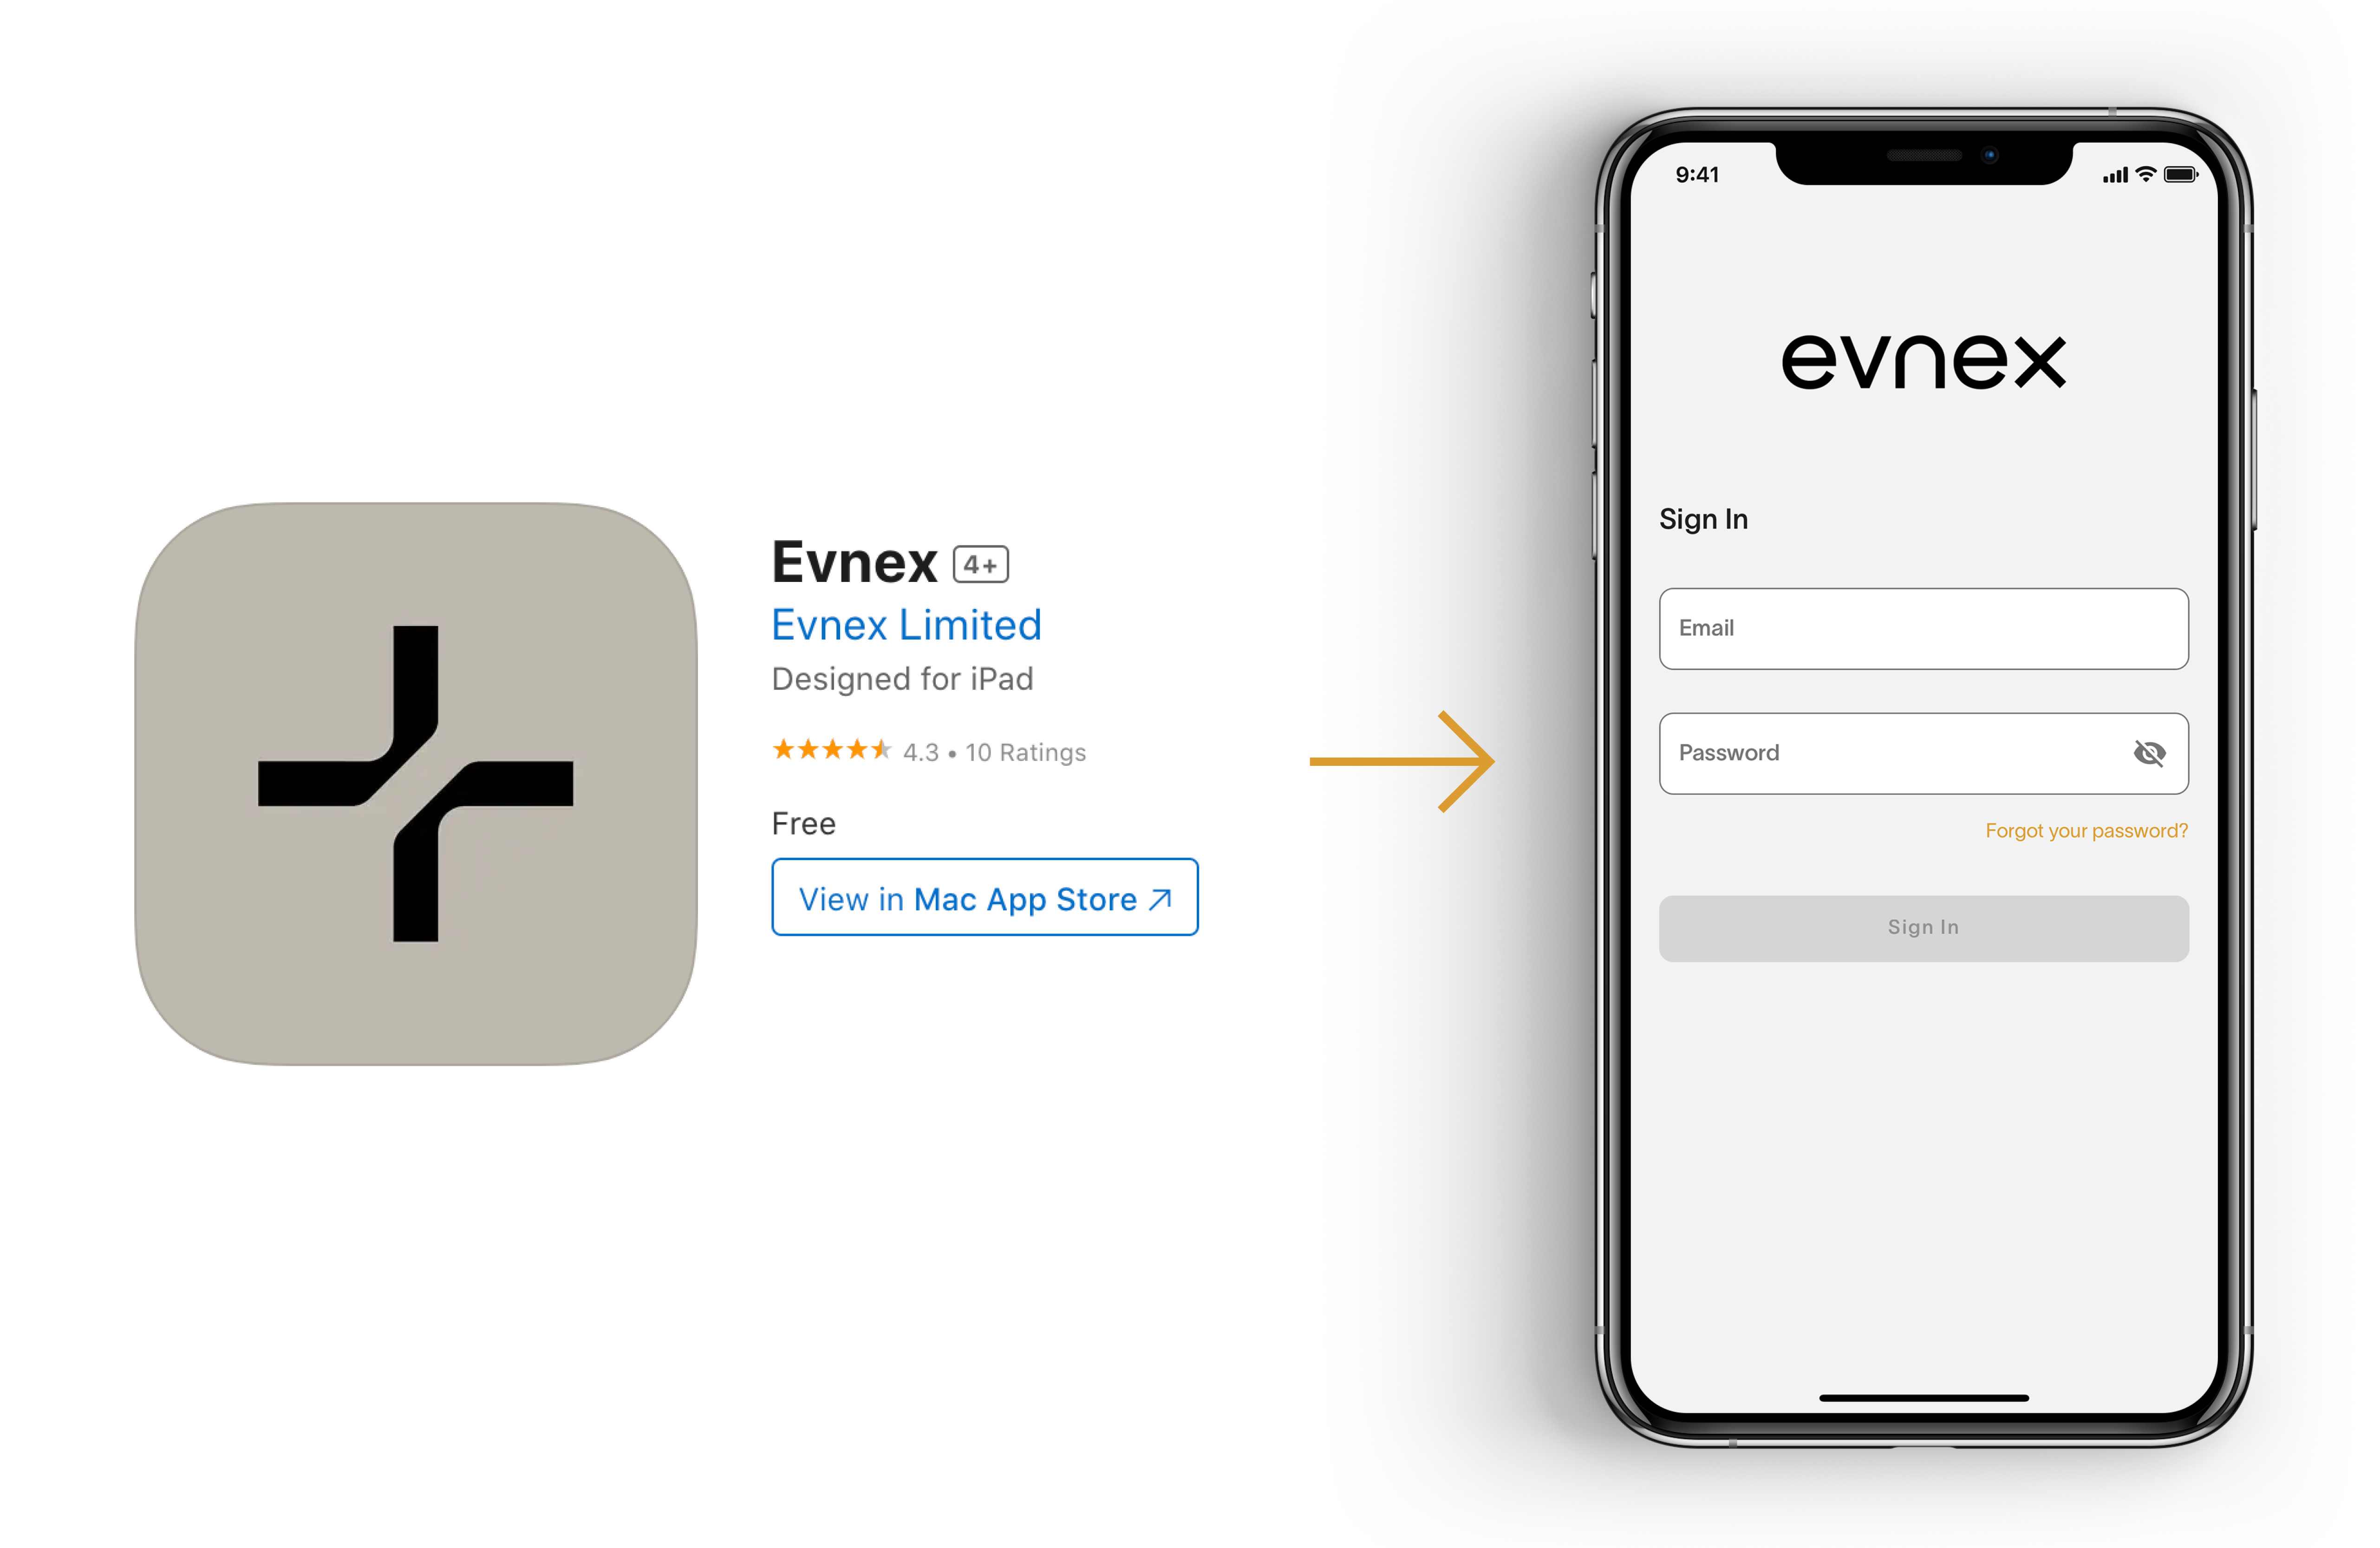 Enter your account details into the "Evnex" Driver App Login Screen